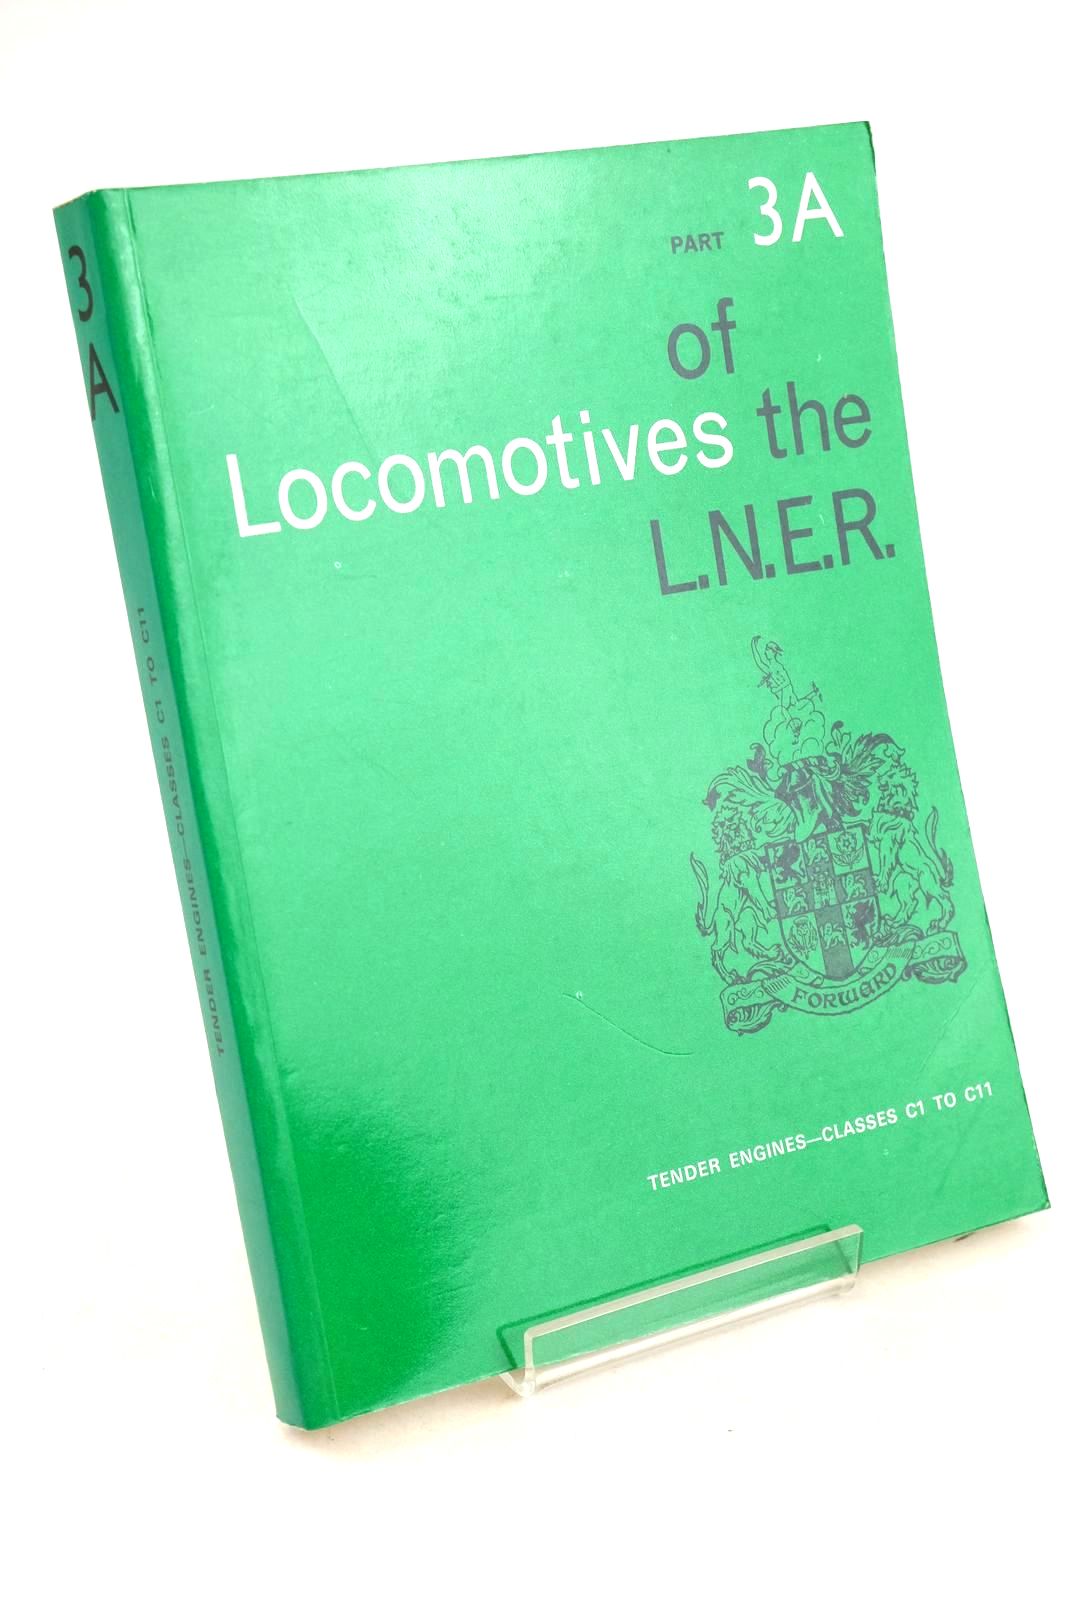 Photo of LOCOMOTIVES OF THE L.N.E.R. PART 3A published by The Railway Correspondence And Travel Society (STOCK CODE: 1327352)  for sale by Stella & Rose's Books